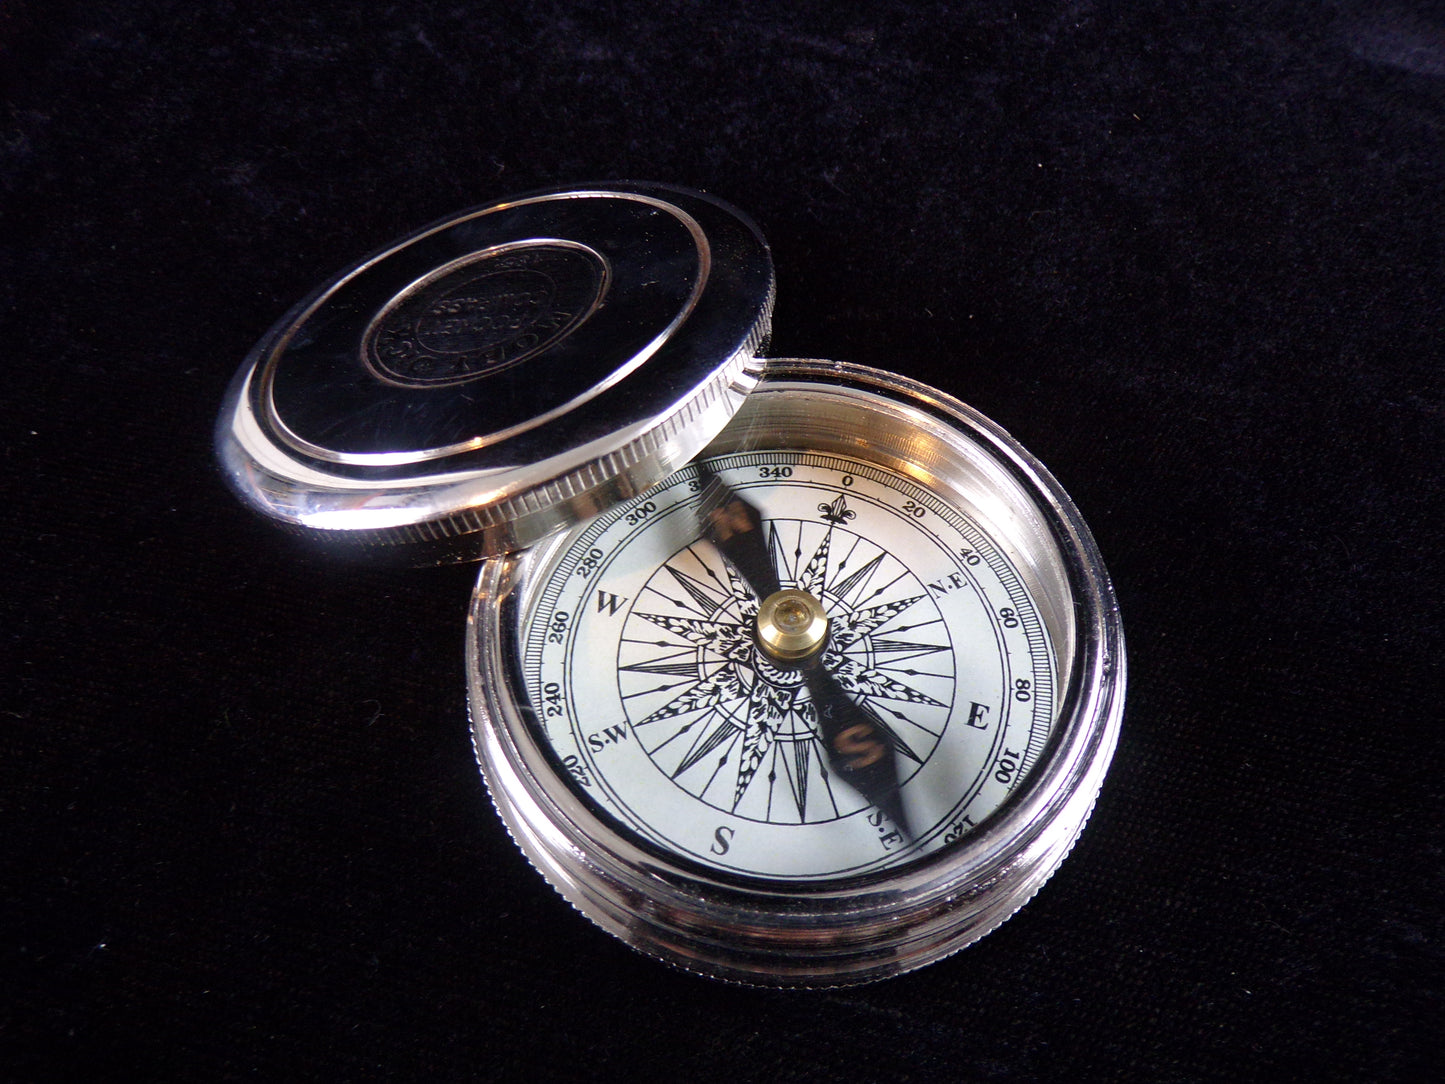 Silver Toned Pocket Compass, Robert Frost "The Road Not Taken"